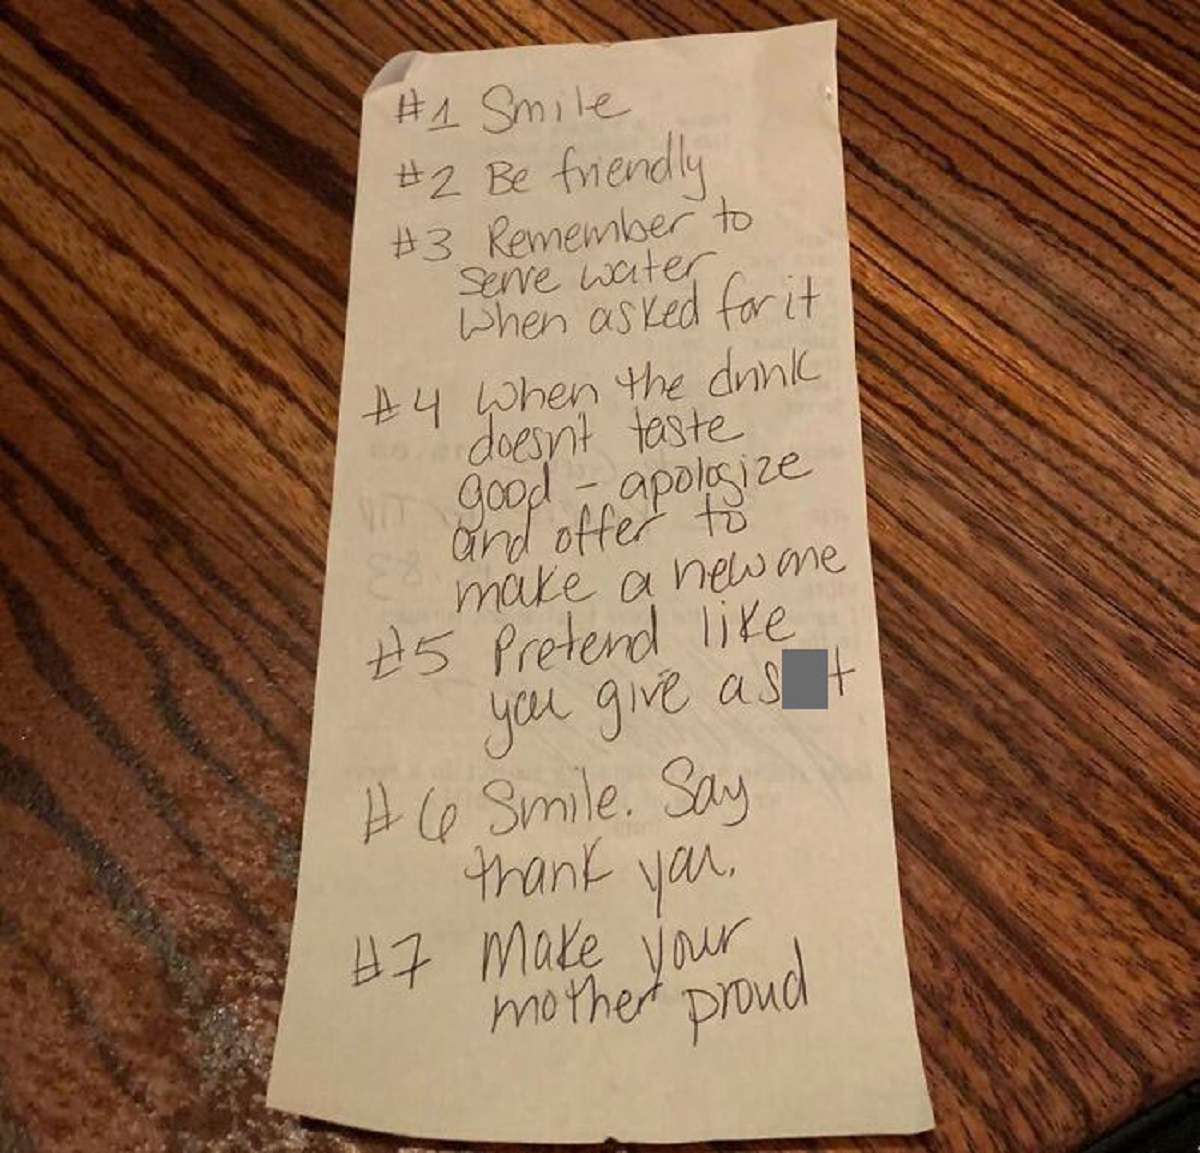 bad customers -  handwriting - Smile Be friendly Remember to Serve water When asked for it I En When the drink to doesn't taste Nit good apologize and offer to make a new one Pretend you give as Smile. Say thank you. Make your mother proud